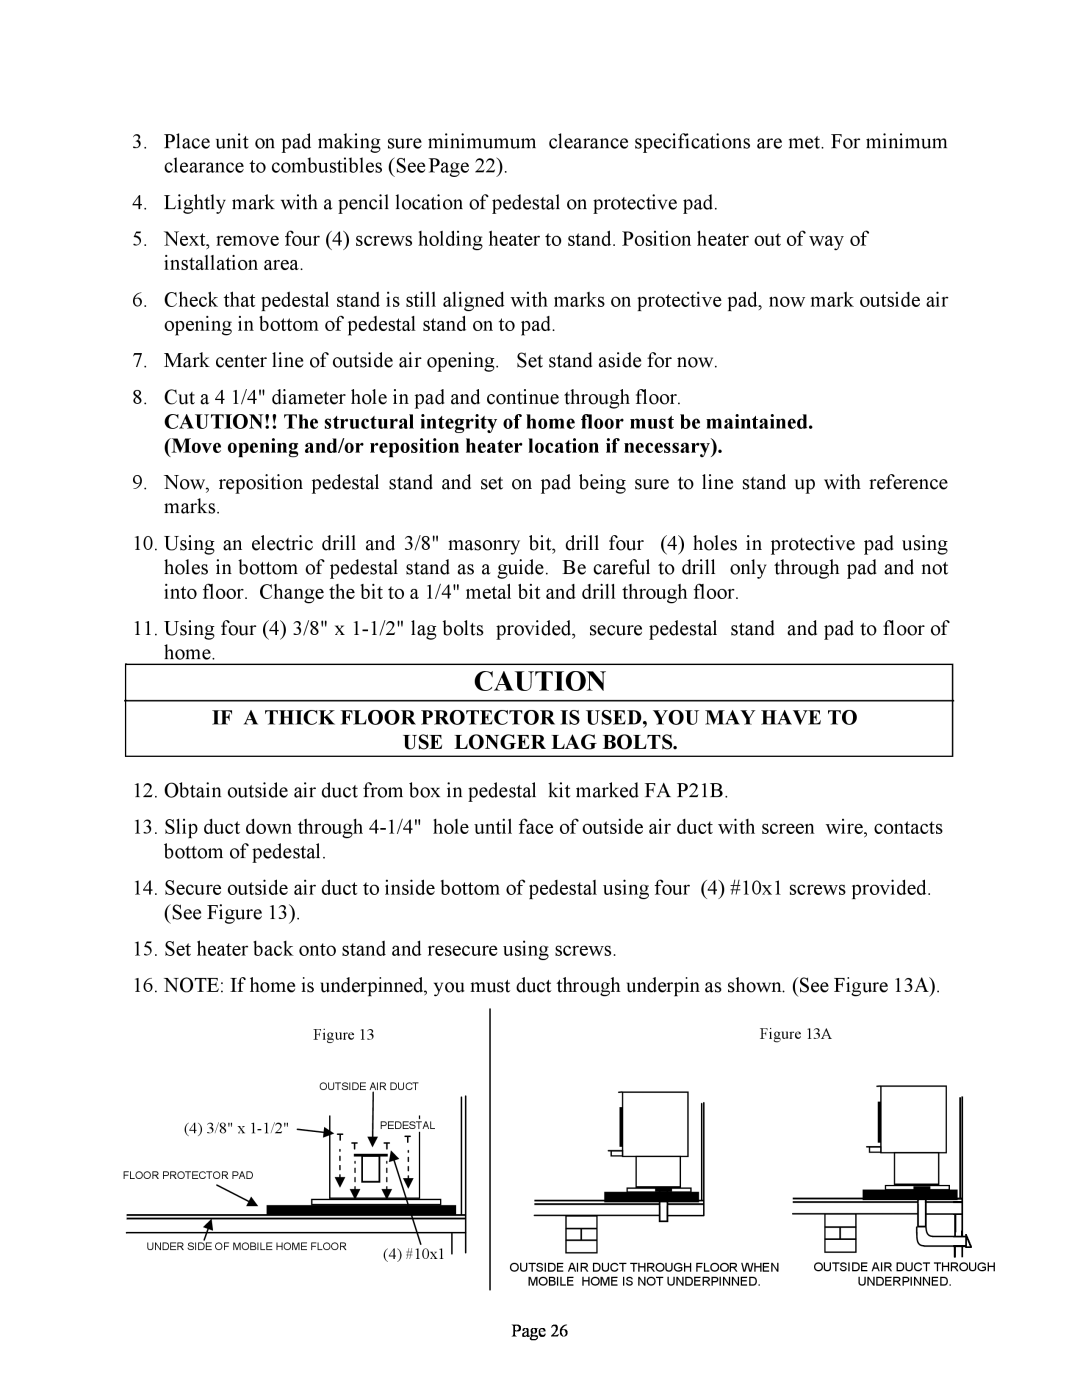 New Buck Corporation 81 installation instructions 4 3/8 x 1-1/2, 4 #10x1, A, Mobile Home Is Not Underpinned 